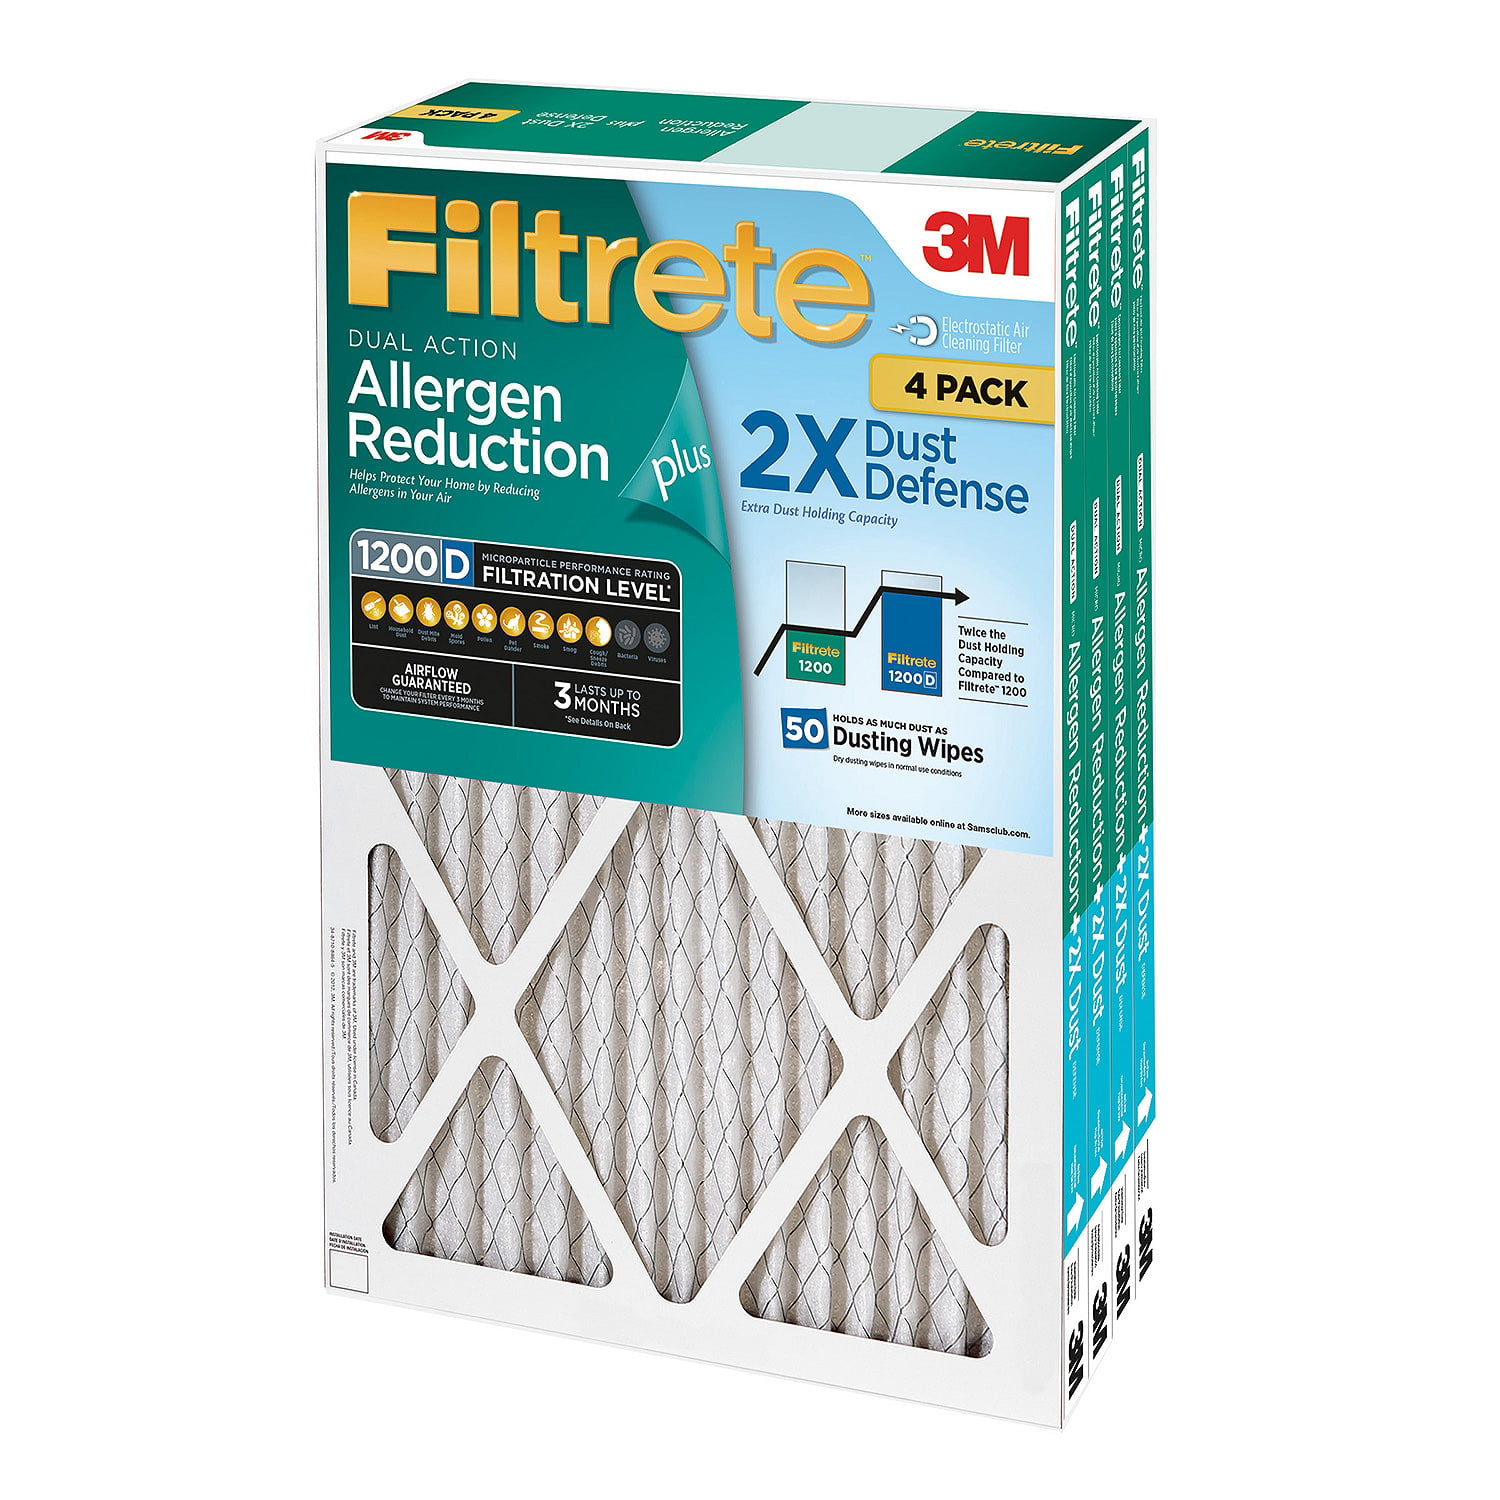 6 Micro Allergen Dust Filters for 99.9% 5.0 Microns Cut to Size 6-1/2" x 7-1/2"